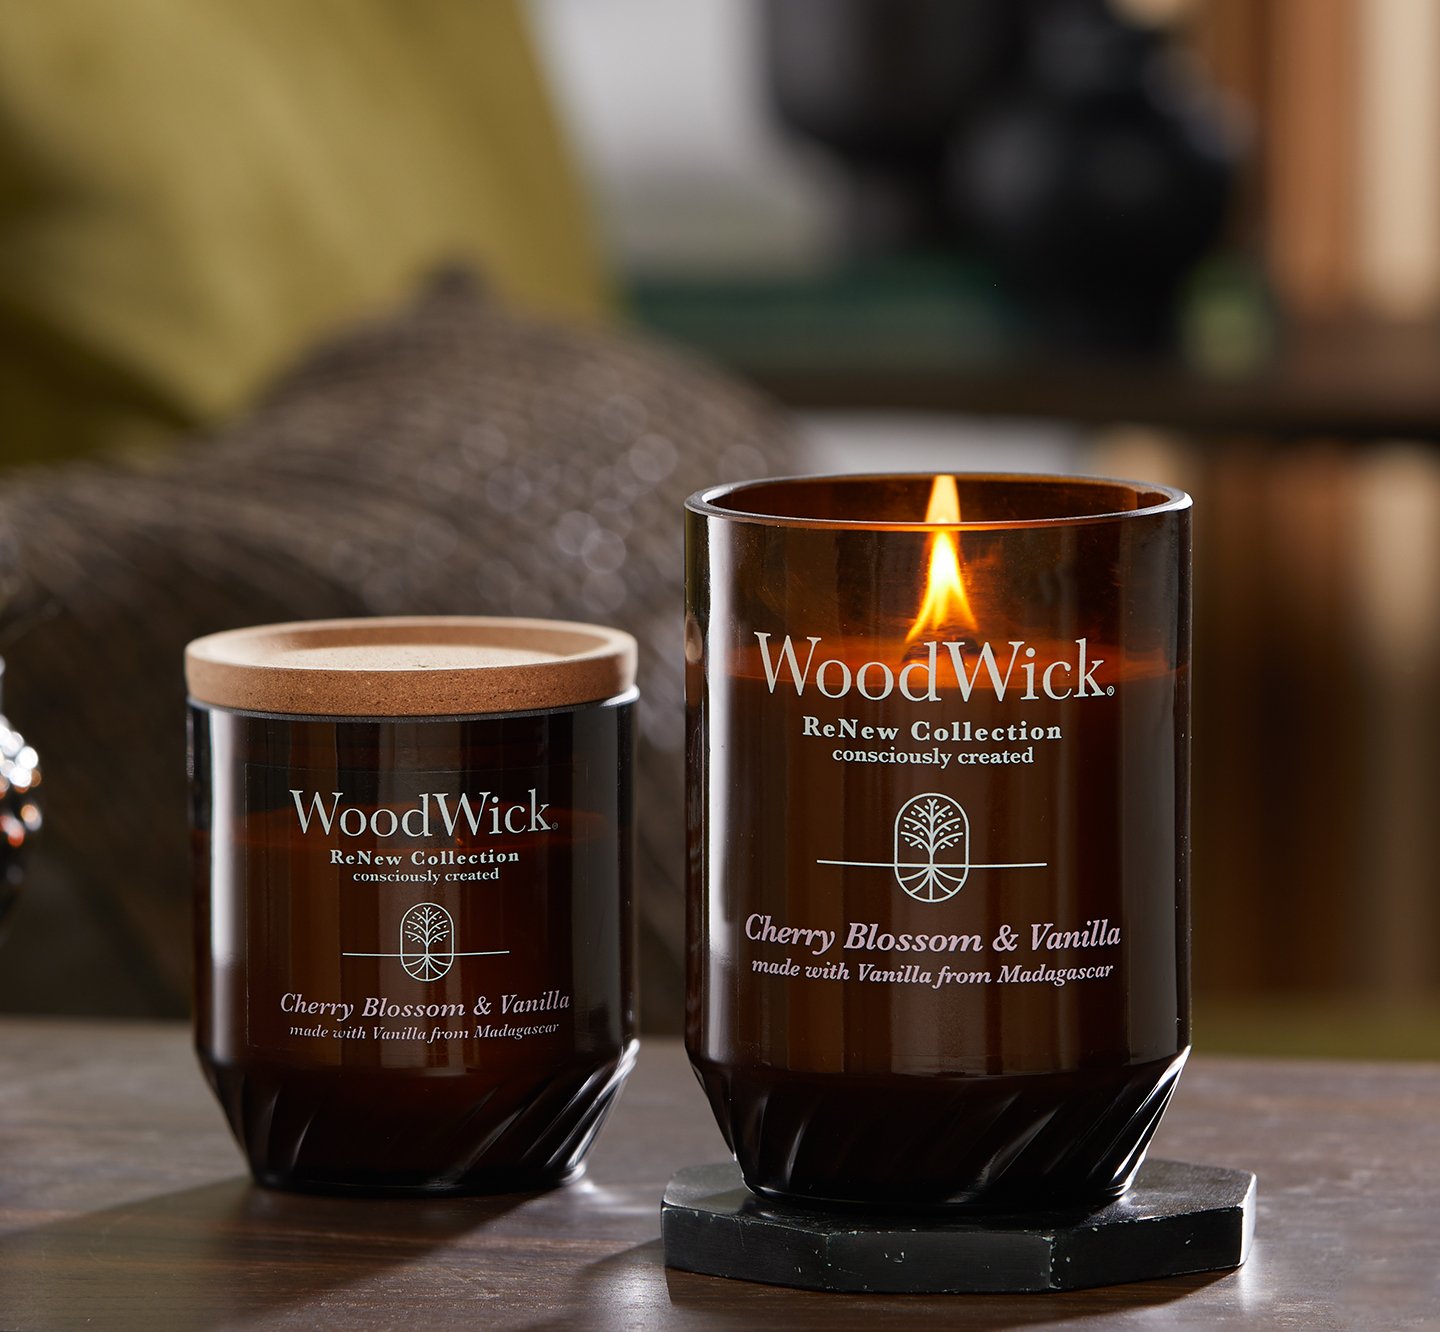 Wood Wick Candle Tutorial For Beginners, Making Wooden Wick Candles At  Home